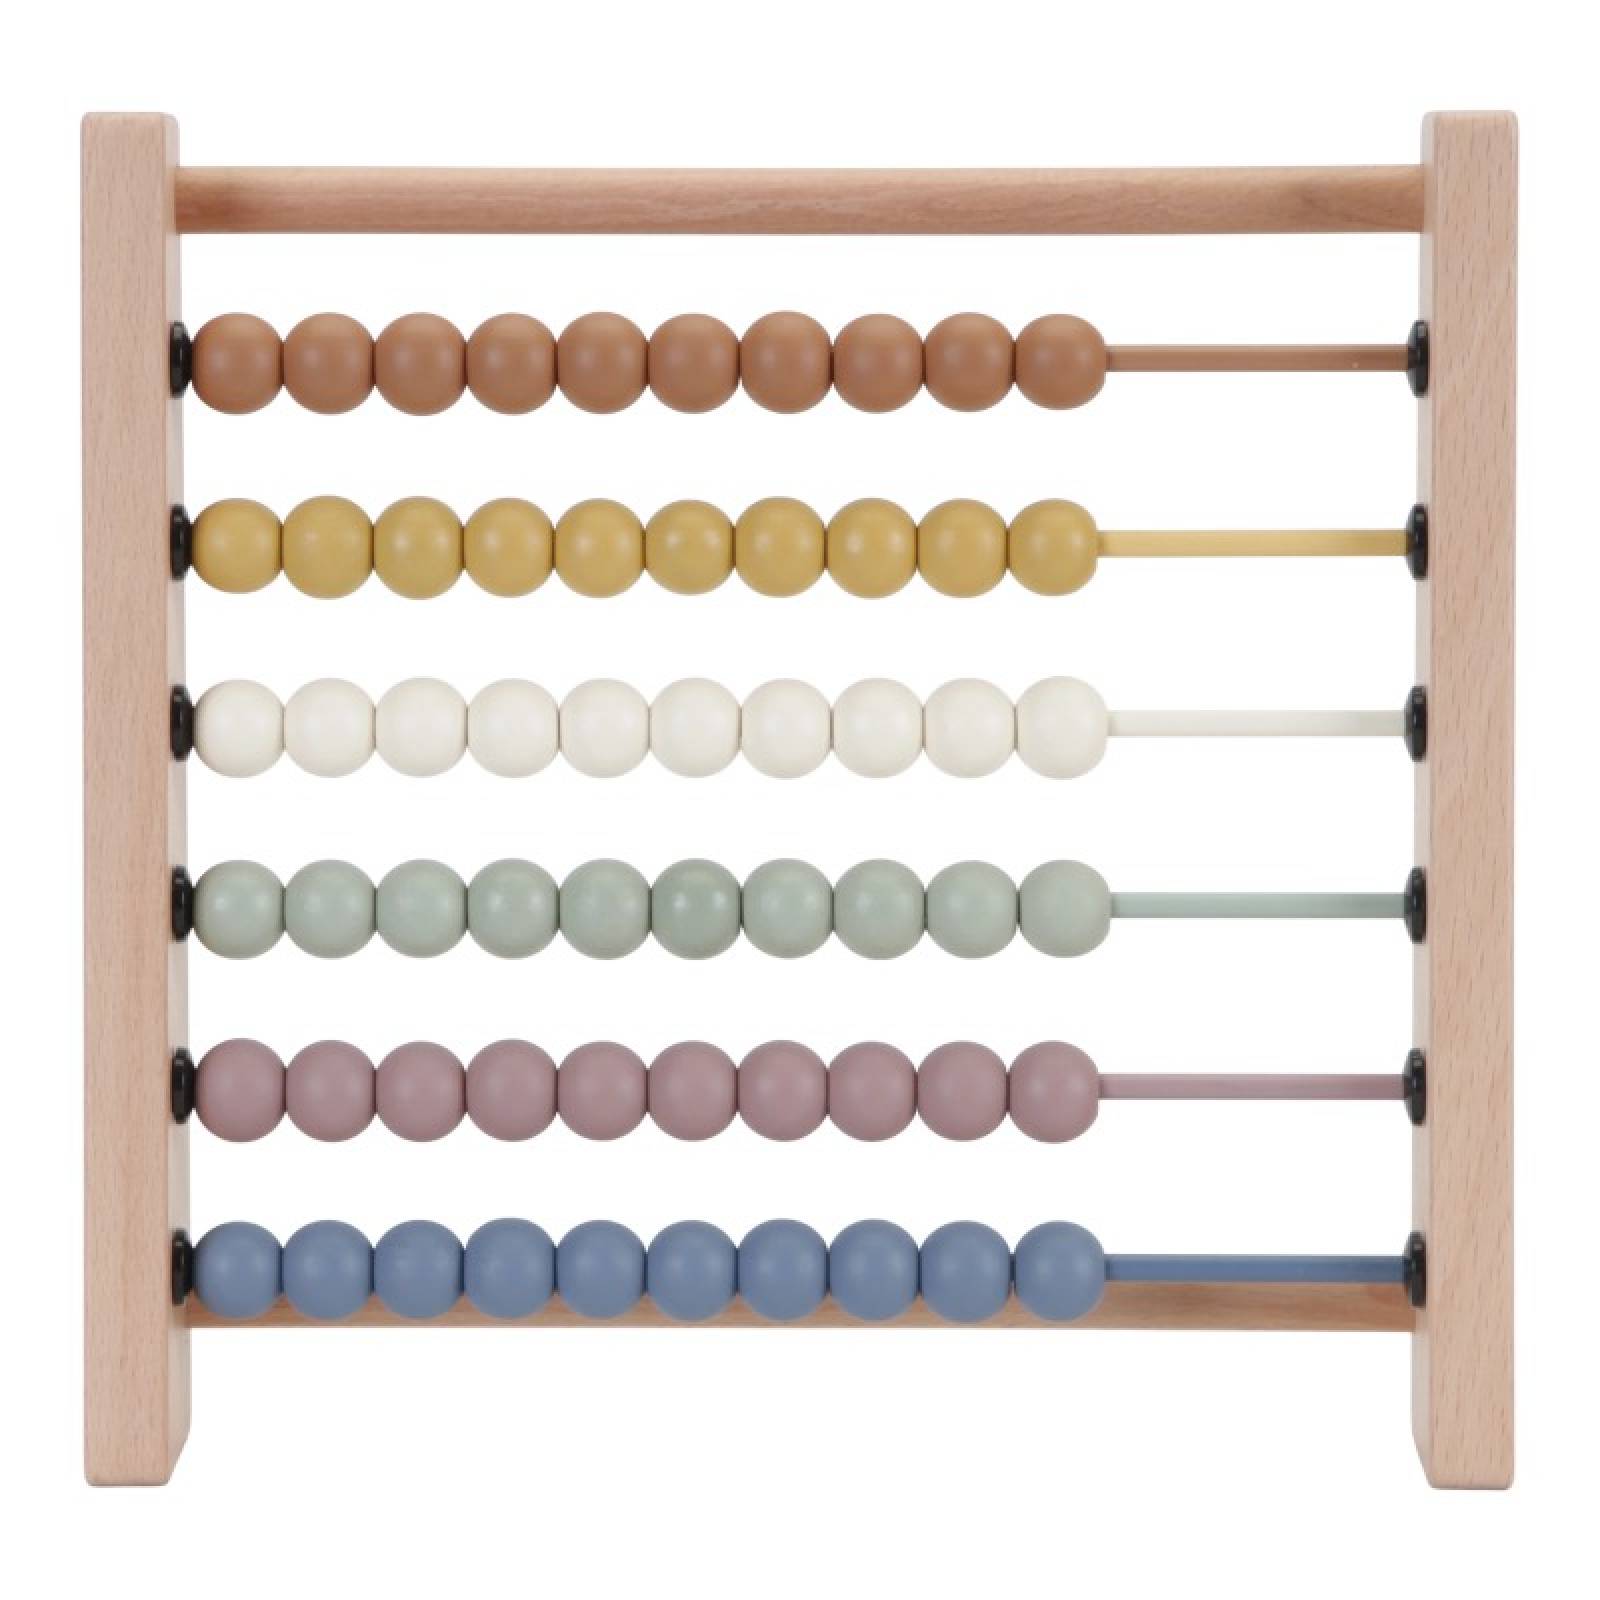 Wooden Abacus In Vintage Colours By Little Dutch 1+